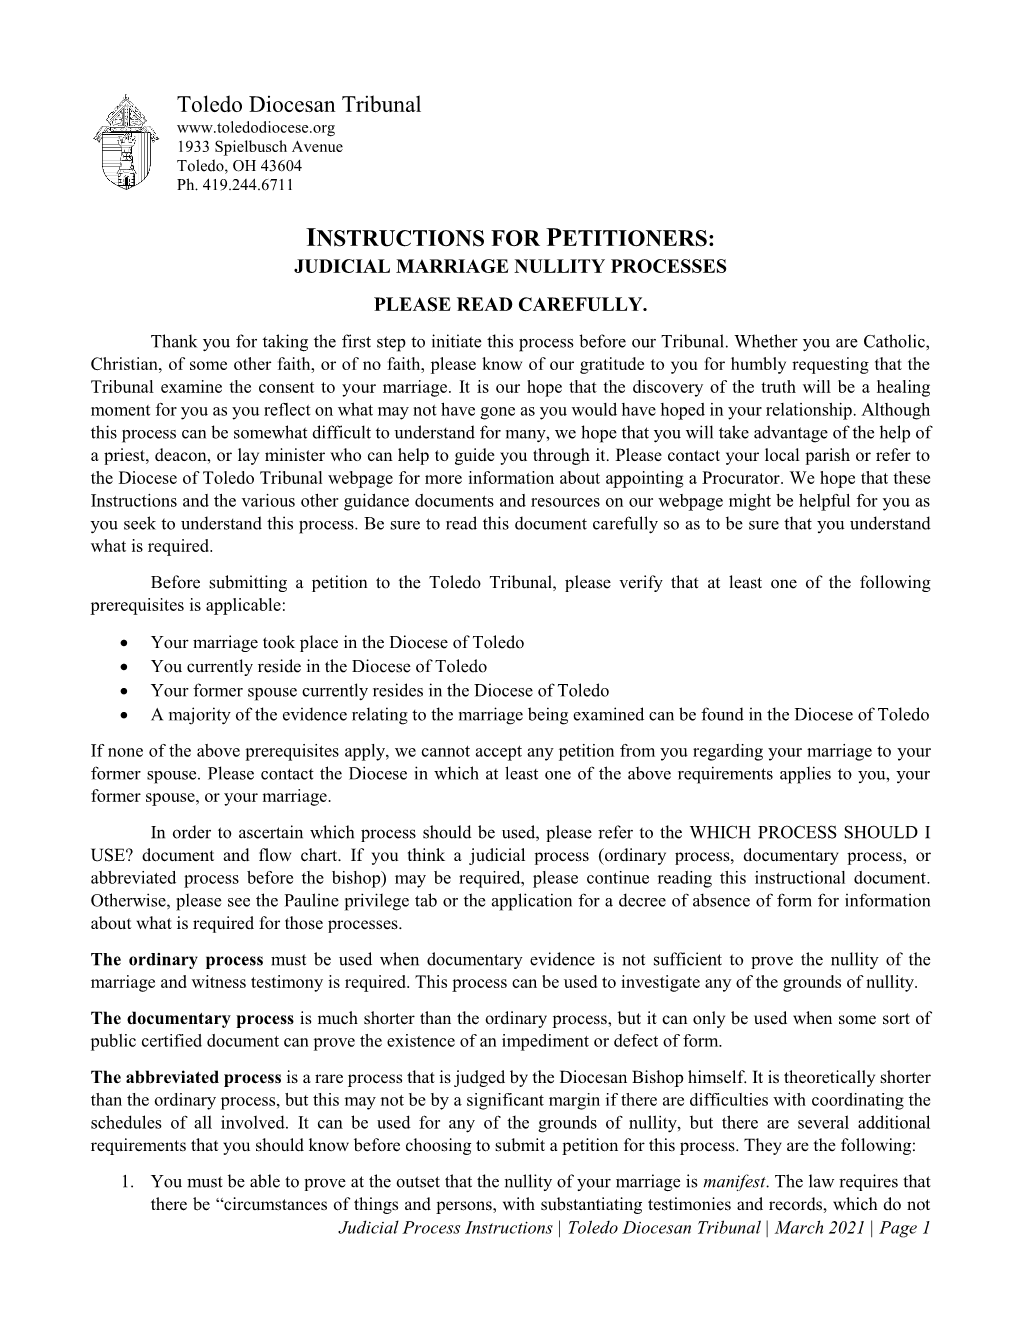 Toledo Diocesan Tribunal INSTRUCTIONS for PETITIONERS